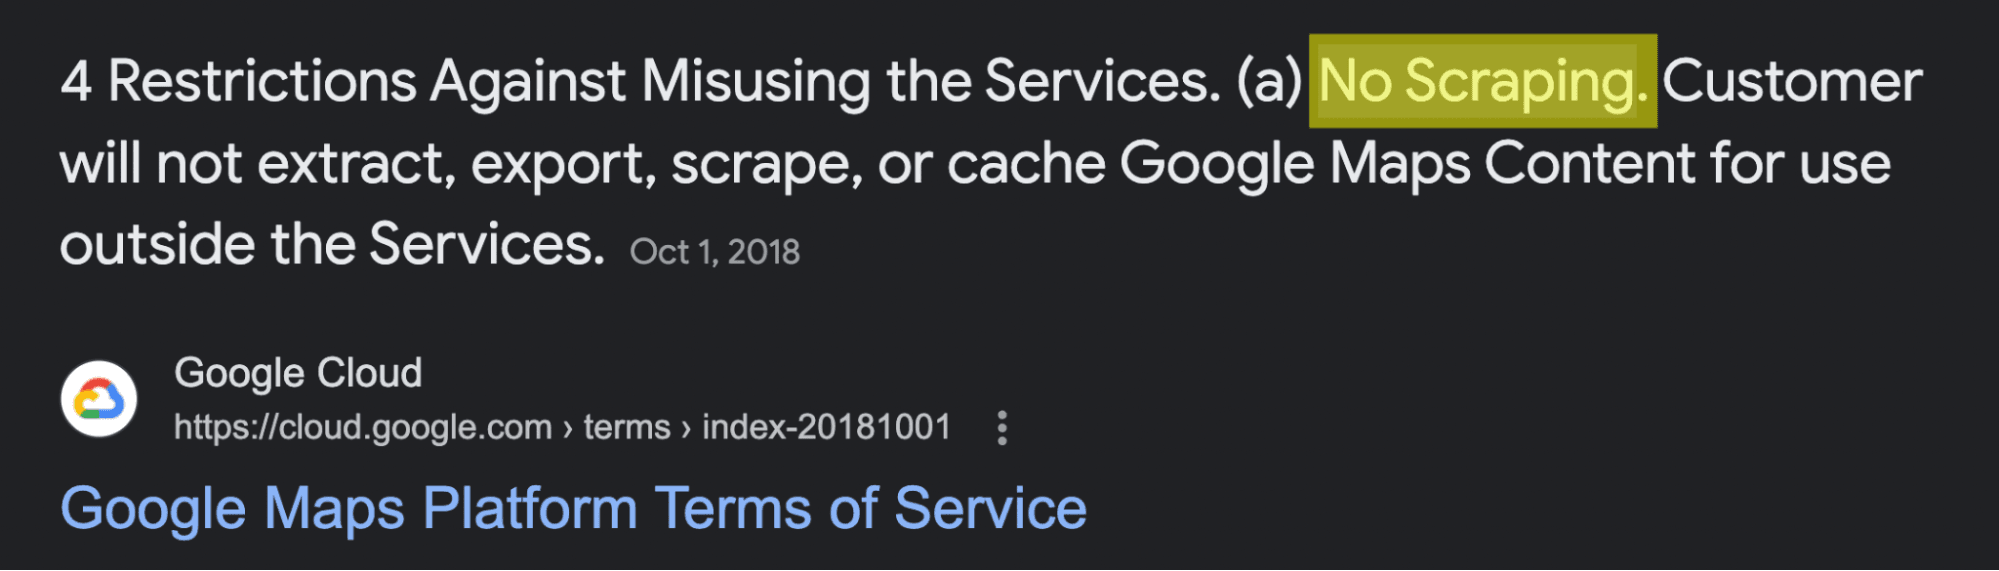 google maps terms of use scraping - image5.png